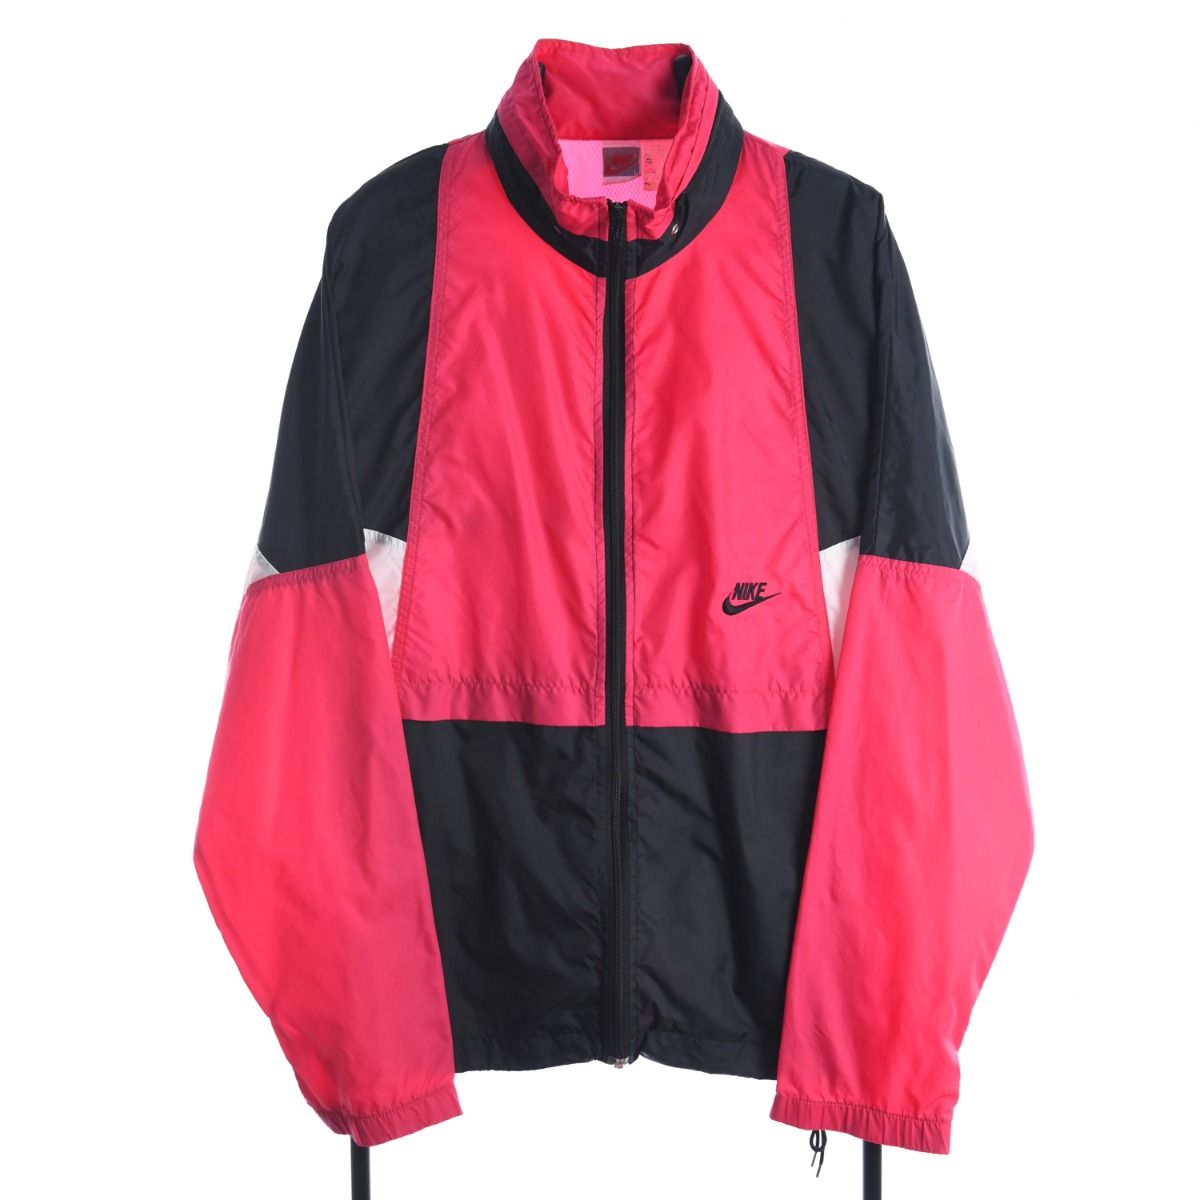 Nike Early 1990s Pink Shell Jacket